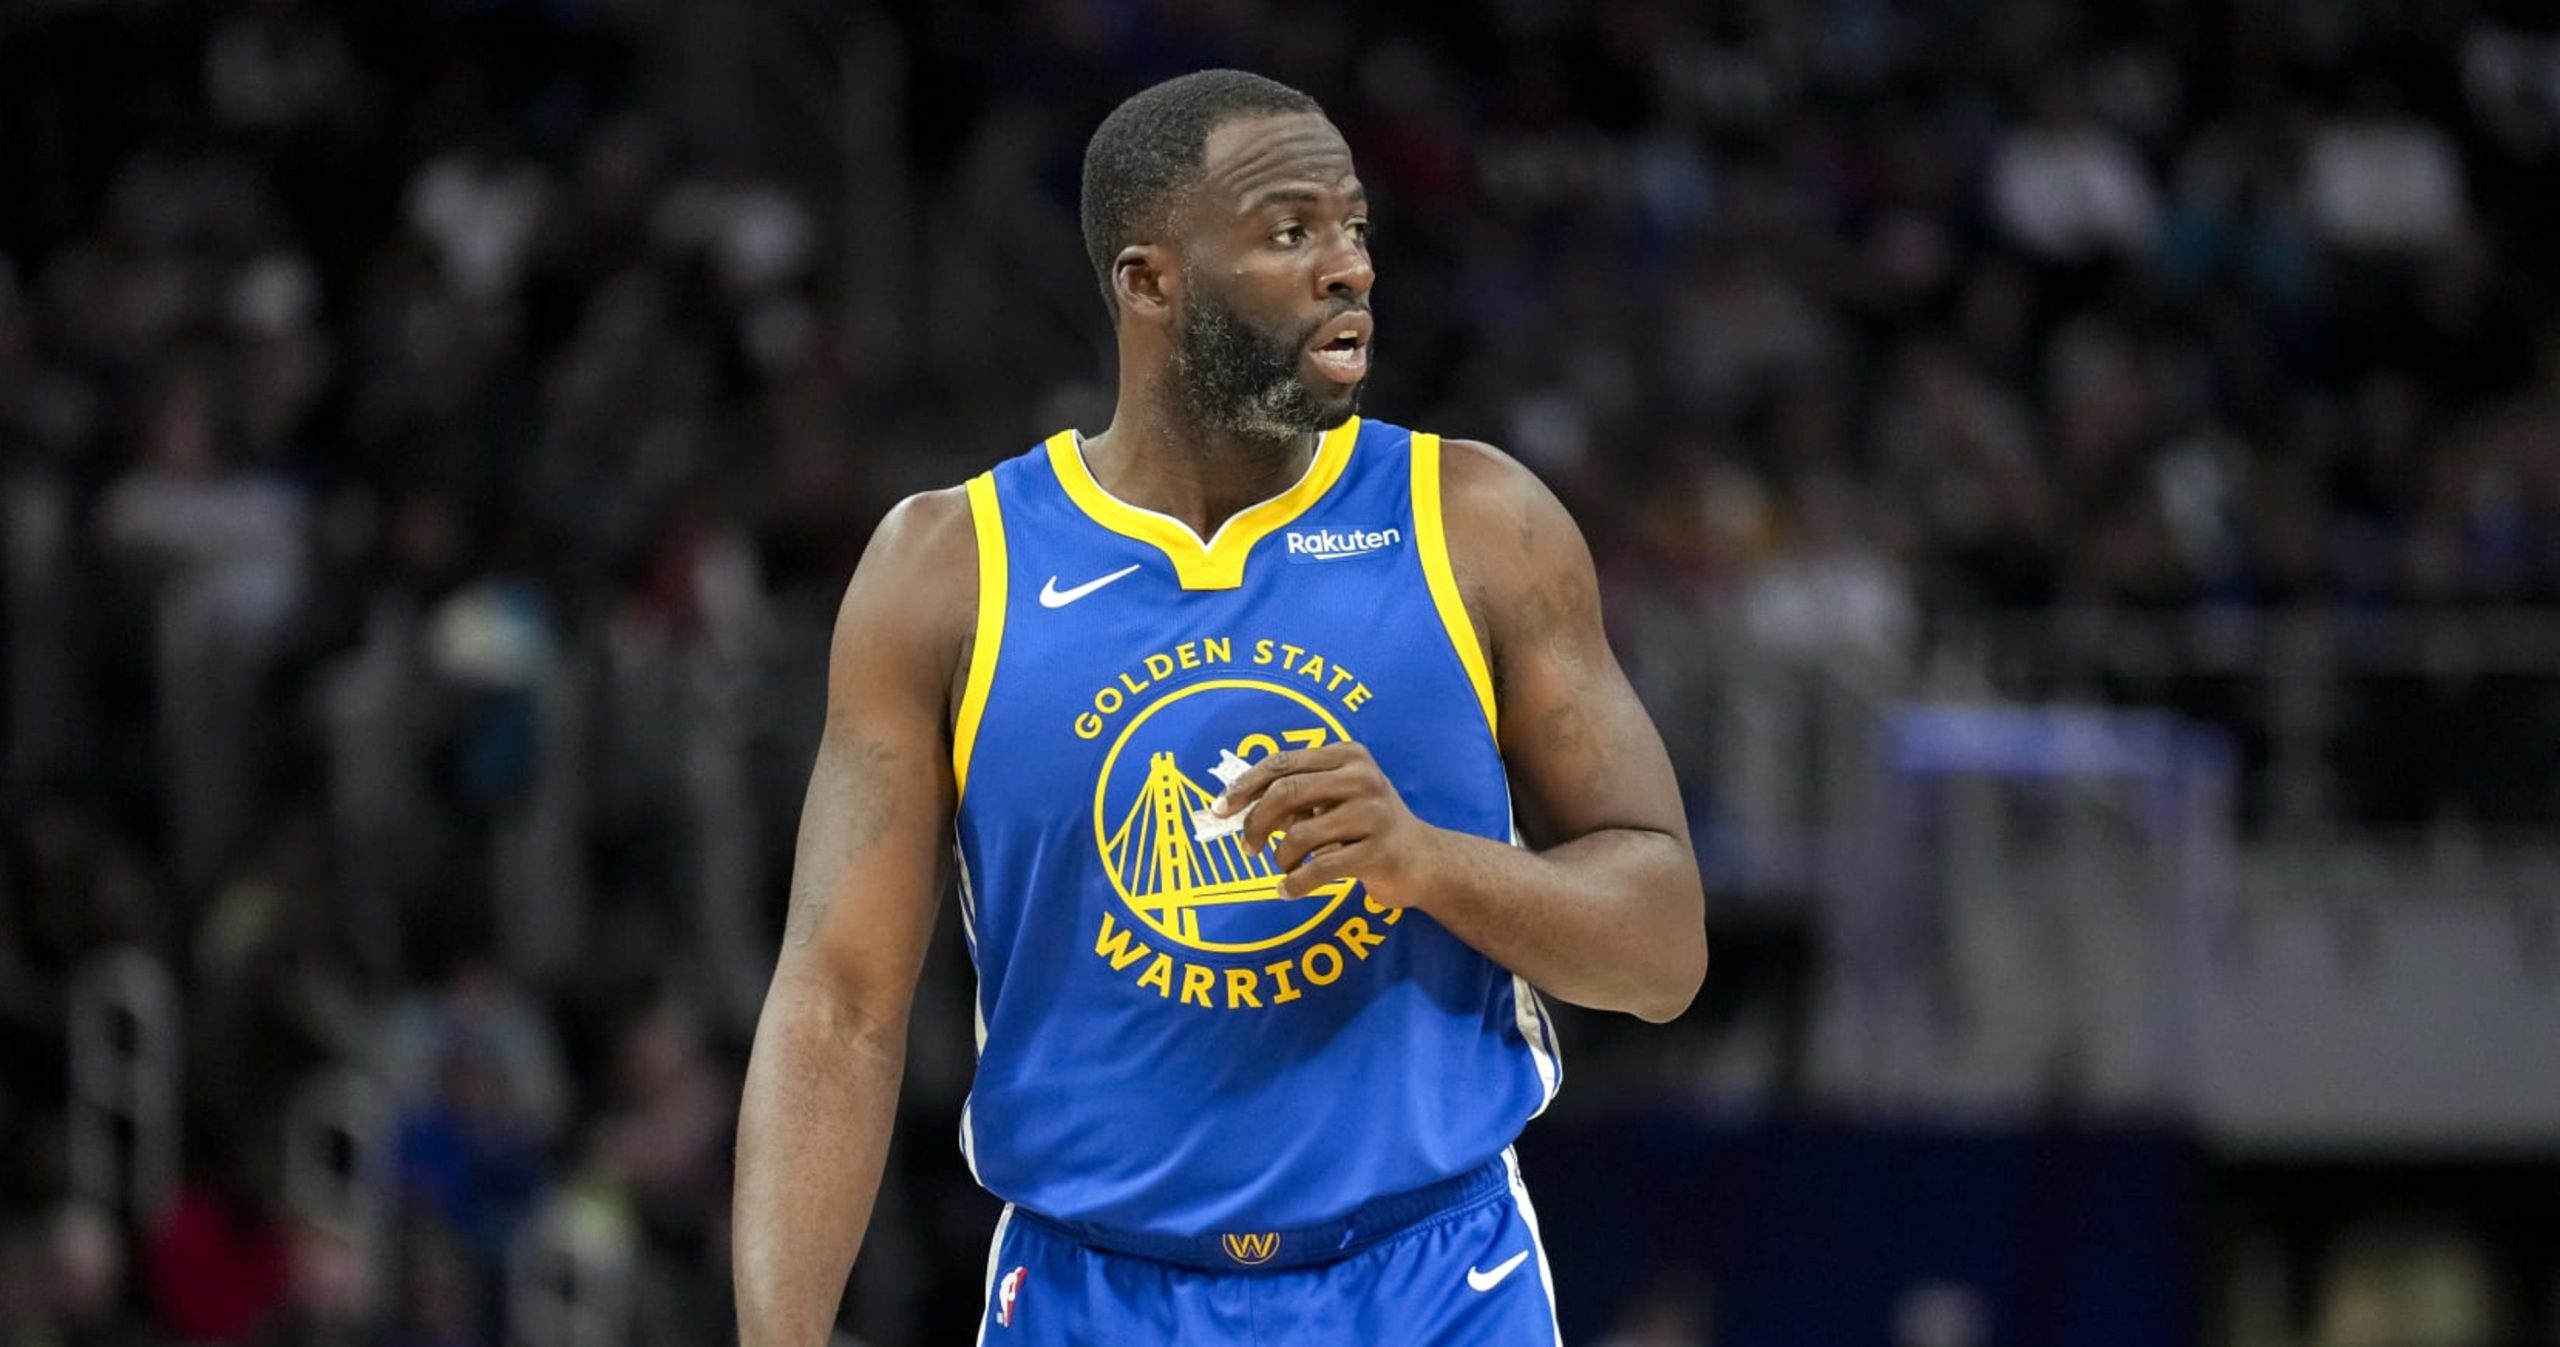 Warriors Fans on Edge: When Will Draymond Green Make His Comeback After Suspension Drama?